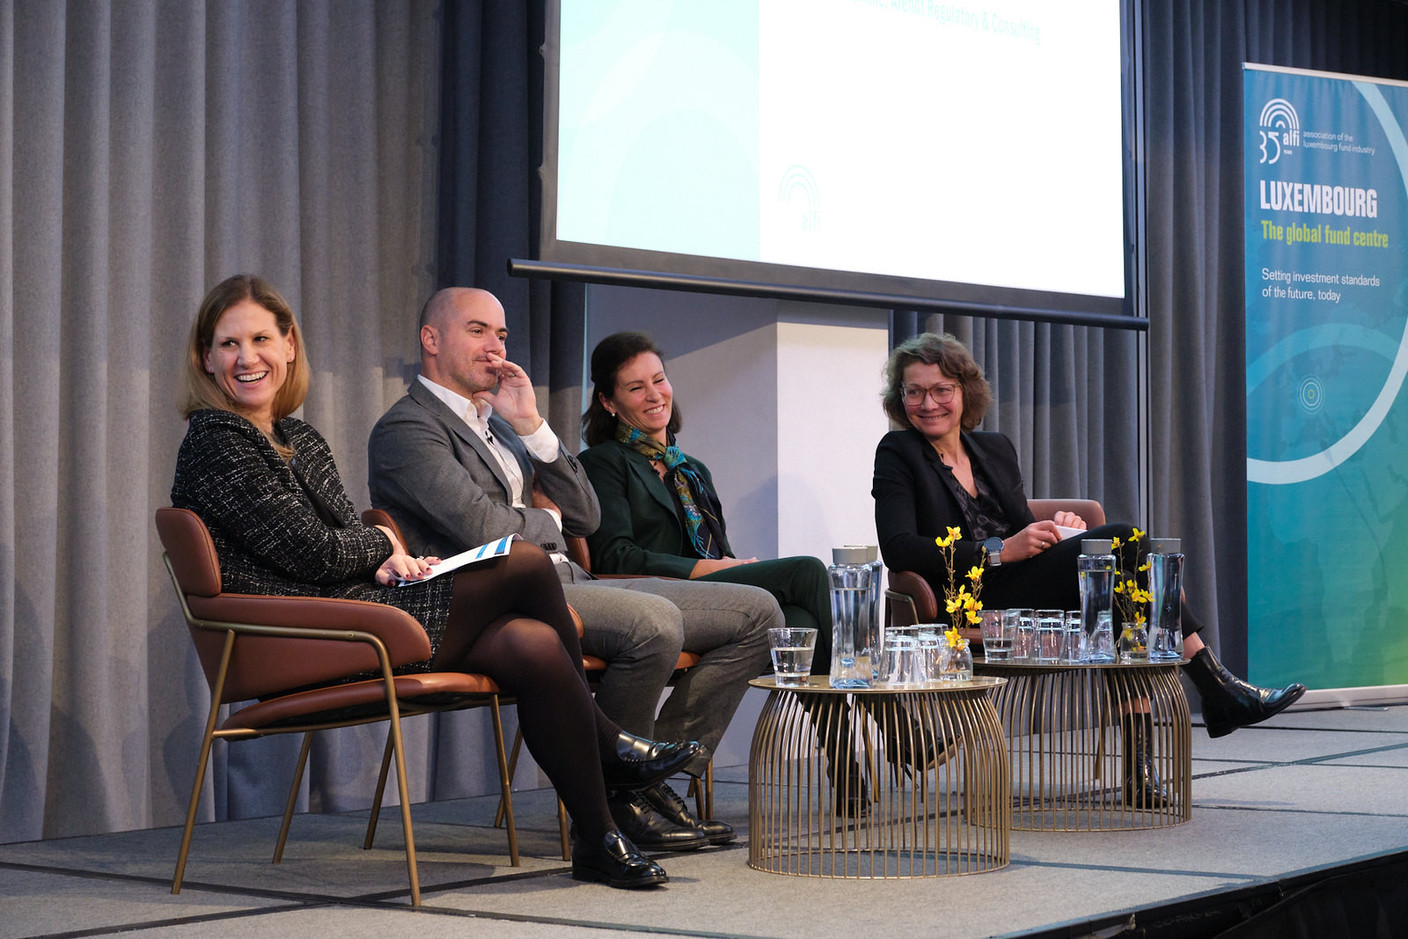 Elena Cardella, head of global fixed income investment specialists team at Amundi UK (second from right), Stephanie Lhomme, head of forensic investigations, corporate intelligence & litigation support Europe at Arendt & Regulatory Consulting (on right). Photo: ALFI